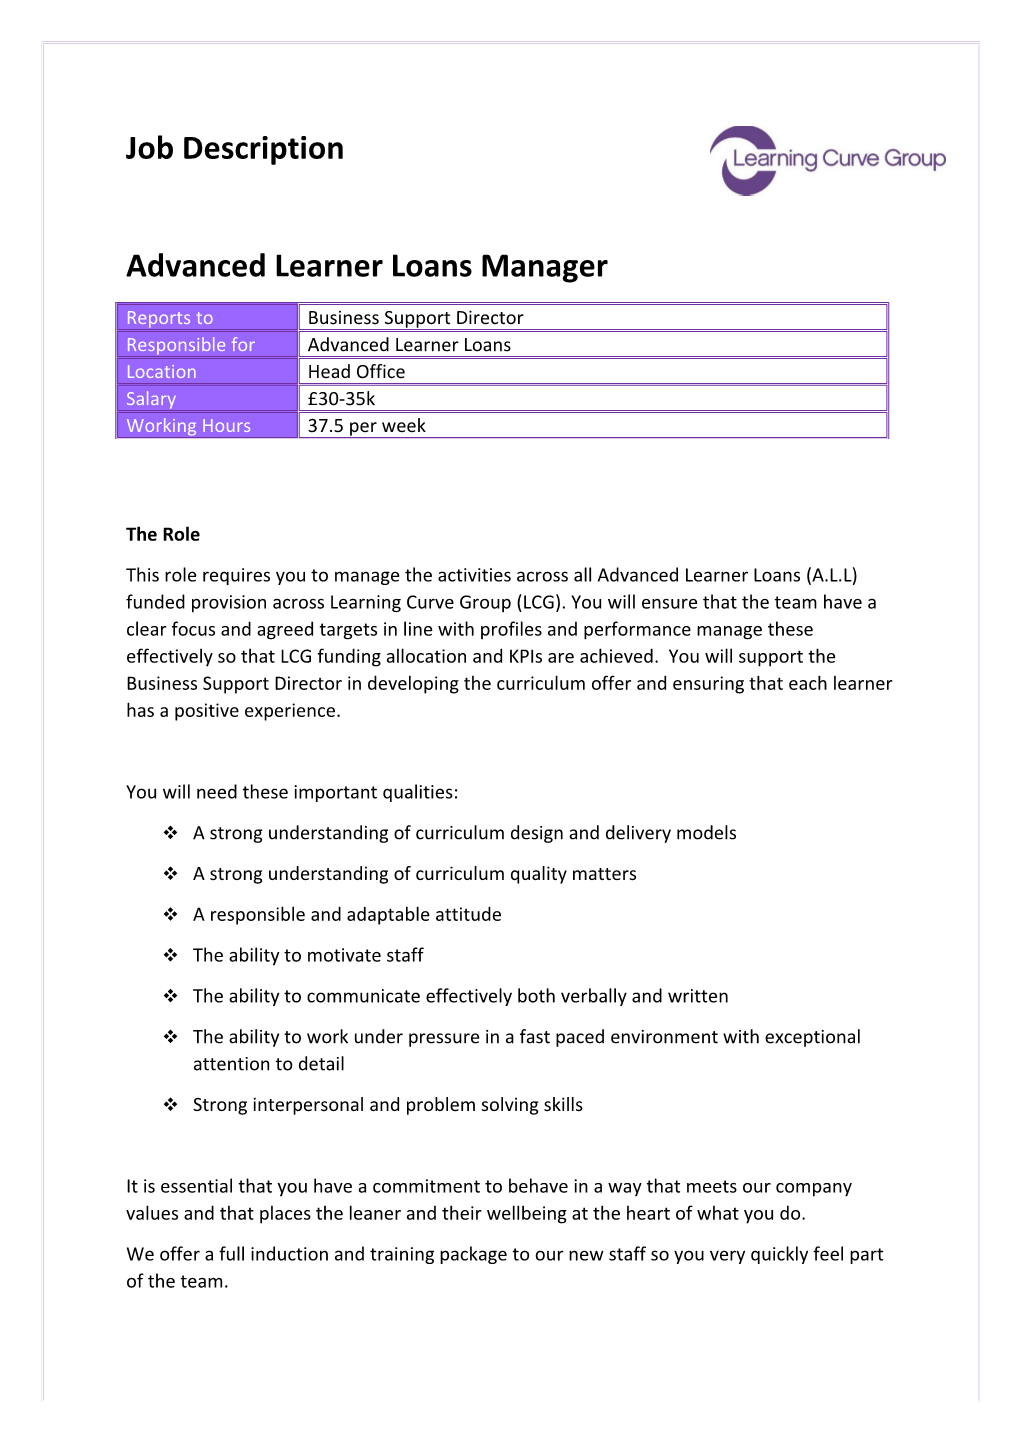 Advanced Learner Loans Manager